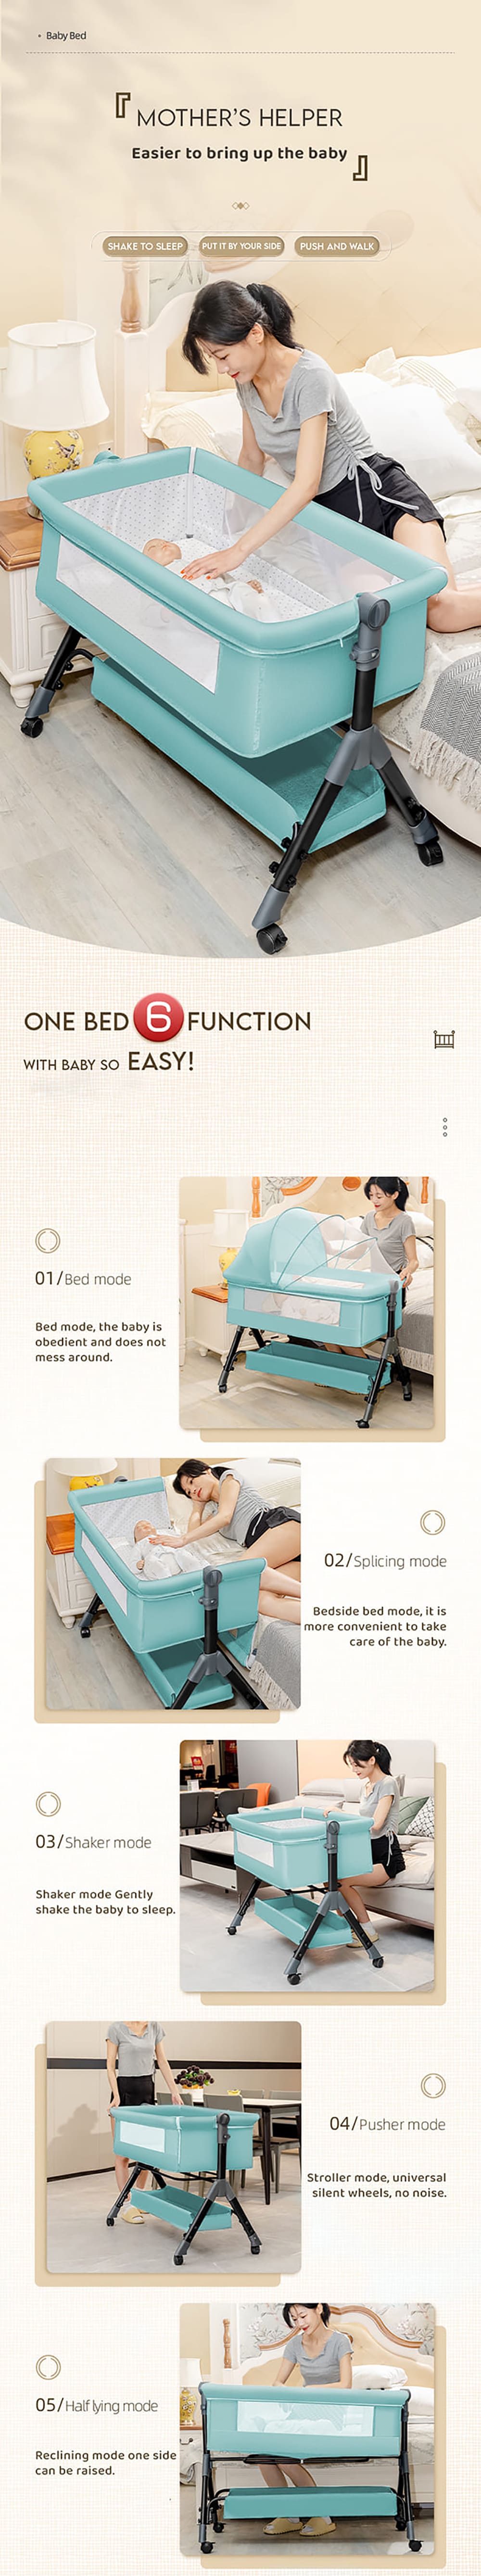 cradle for baby